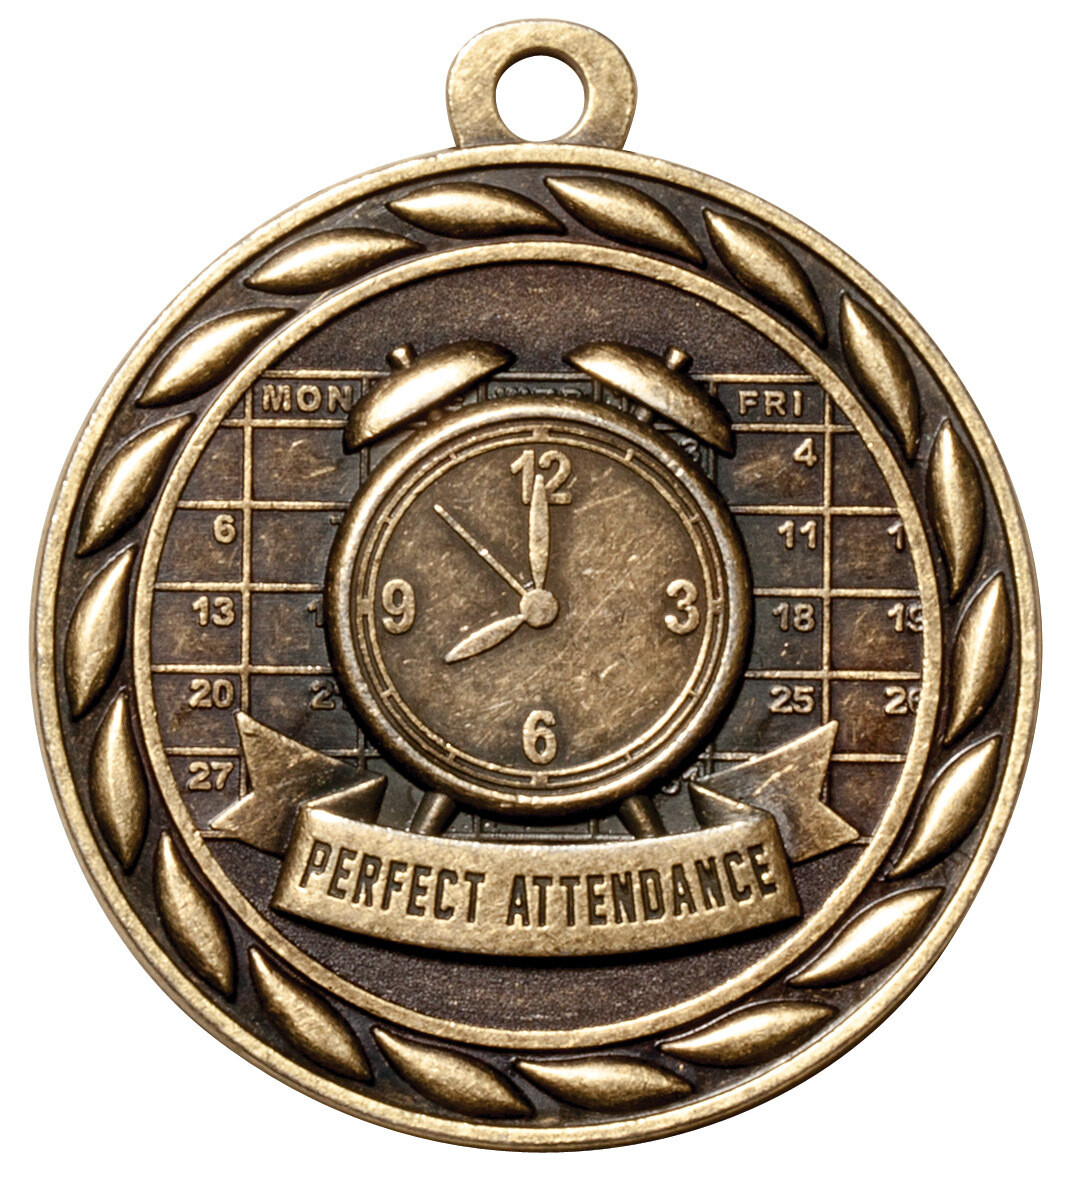 Scholastic Medal Series
PERFECT ATTENDANCE